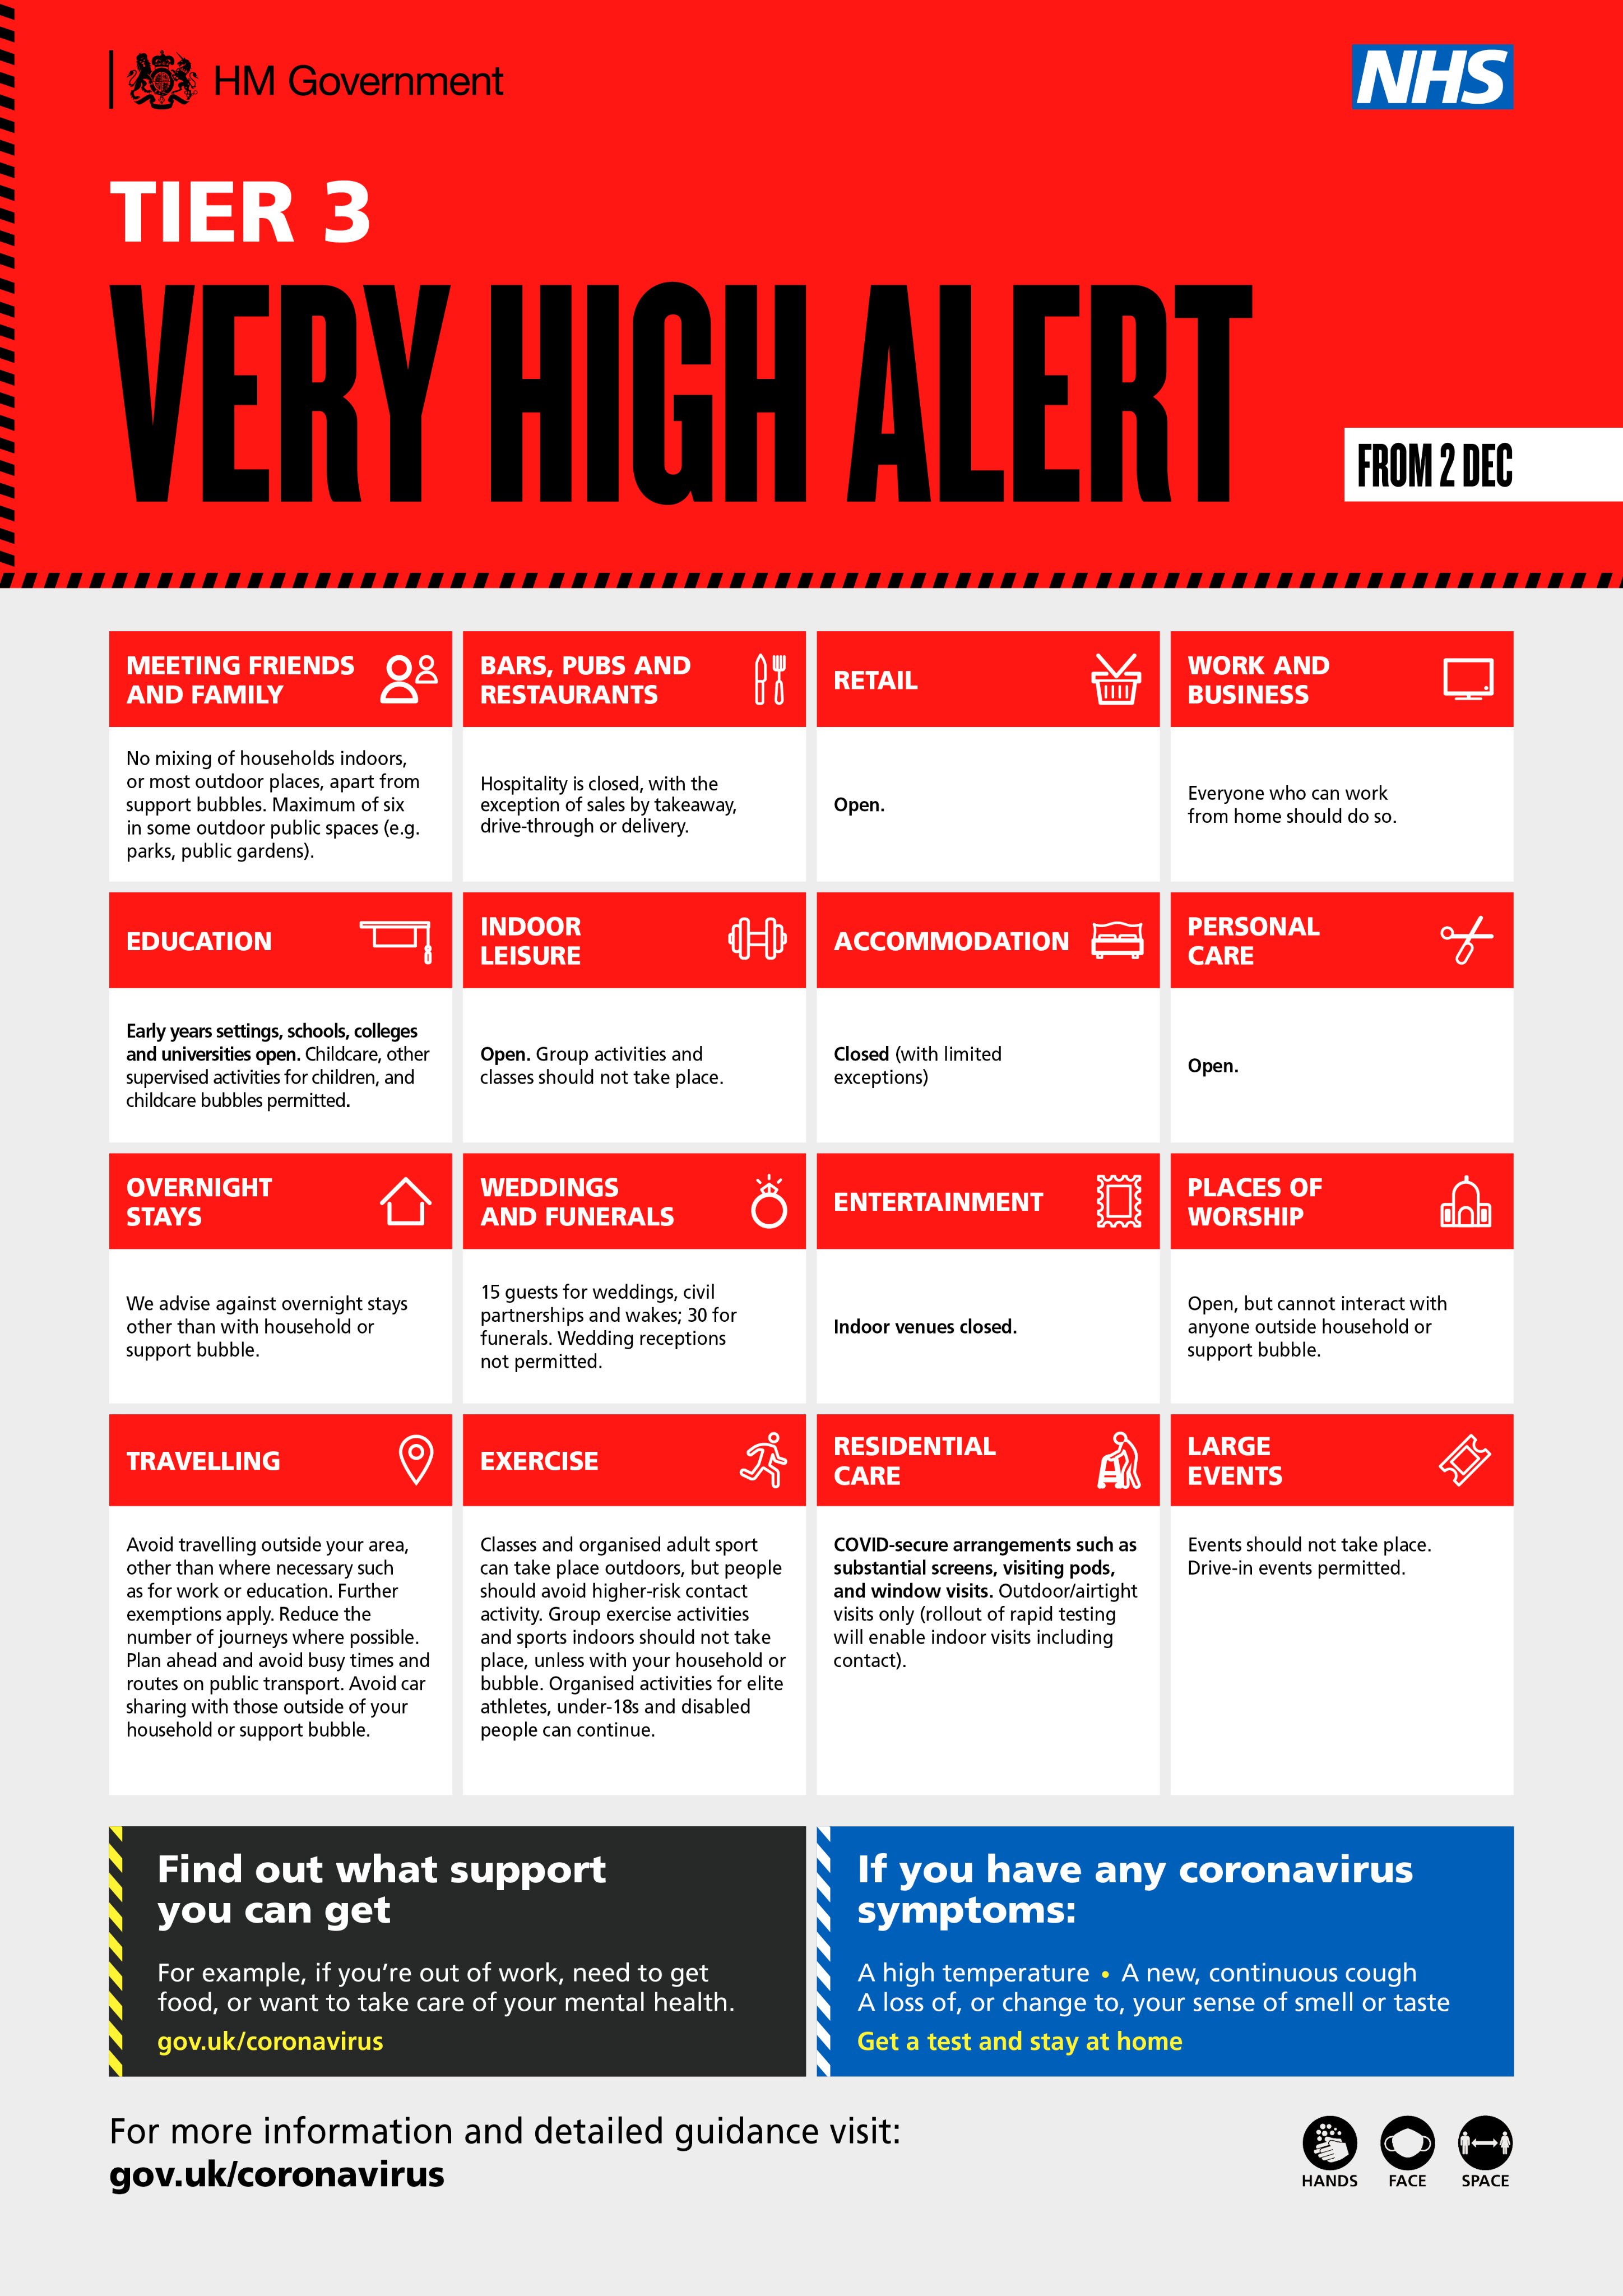 Visual representation of rules in Tier 3 Very High alert. Visit the link in the tweet for more information.